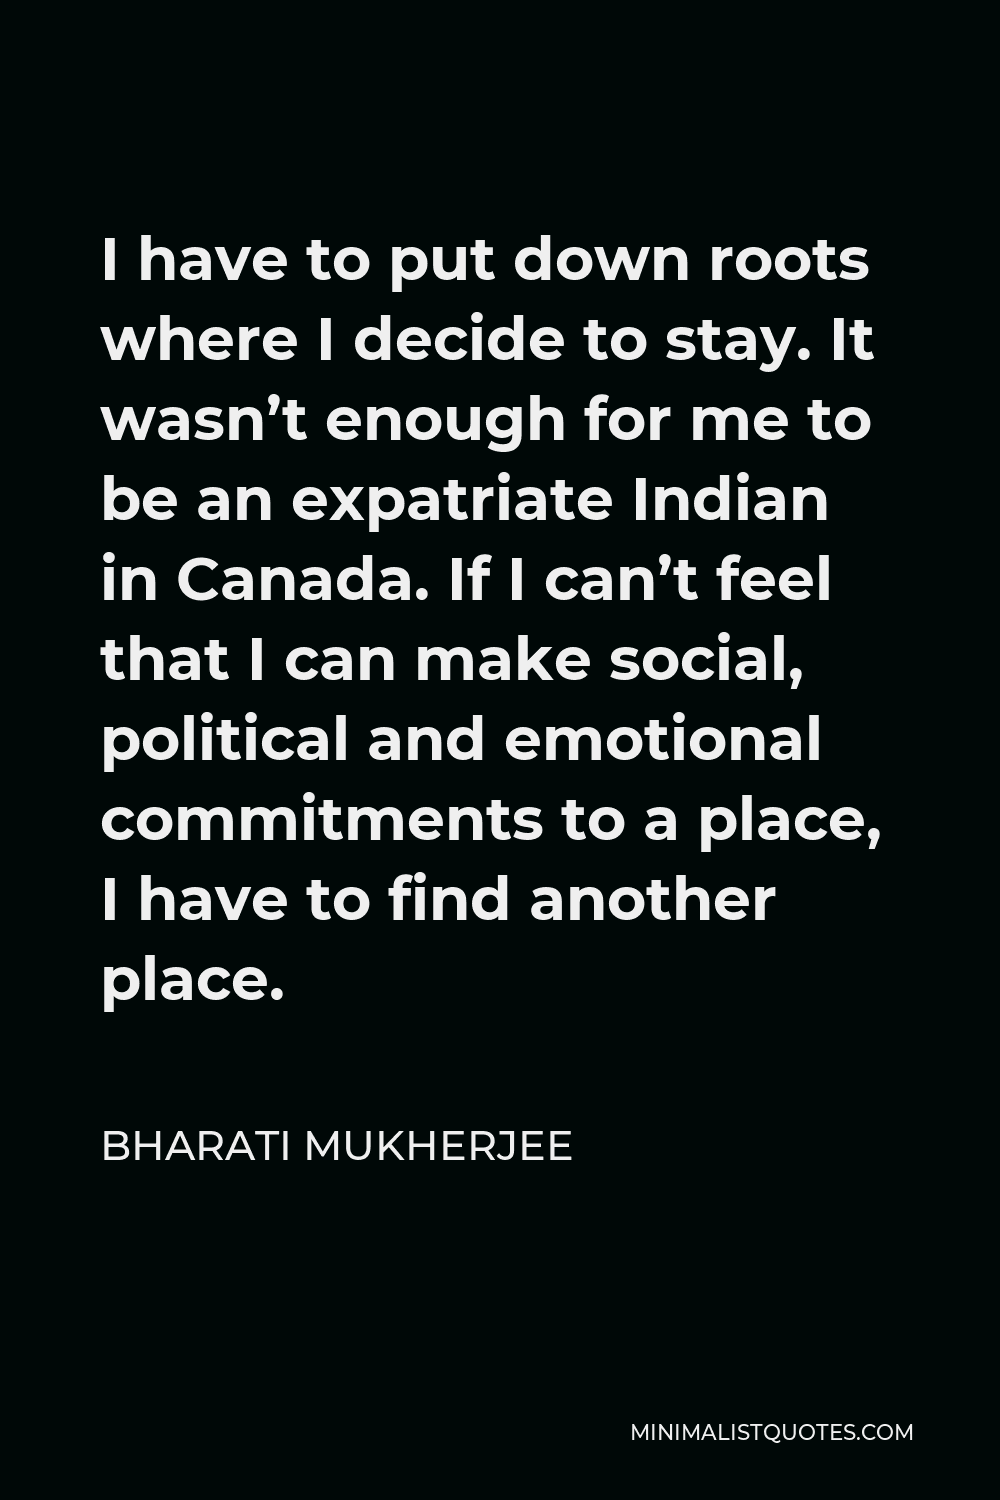 Bharati Mukherjee Quote - I have to put down roots where I decide to stay. It wasn’t enough for me to be an expatriate Indian in Canada. If I can’t feel that I can make social, political and emotional commitments to a place, I have to find another place.